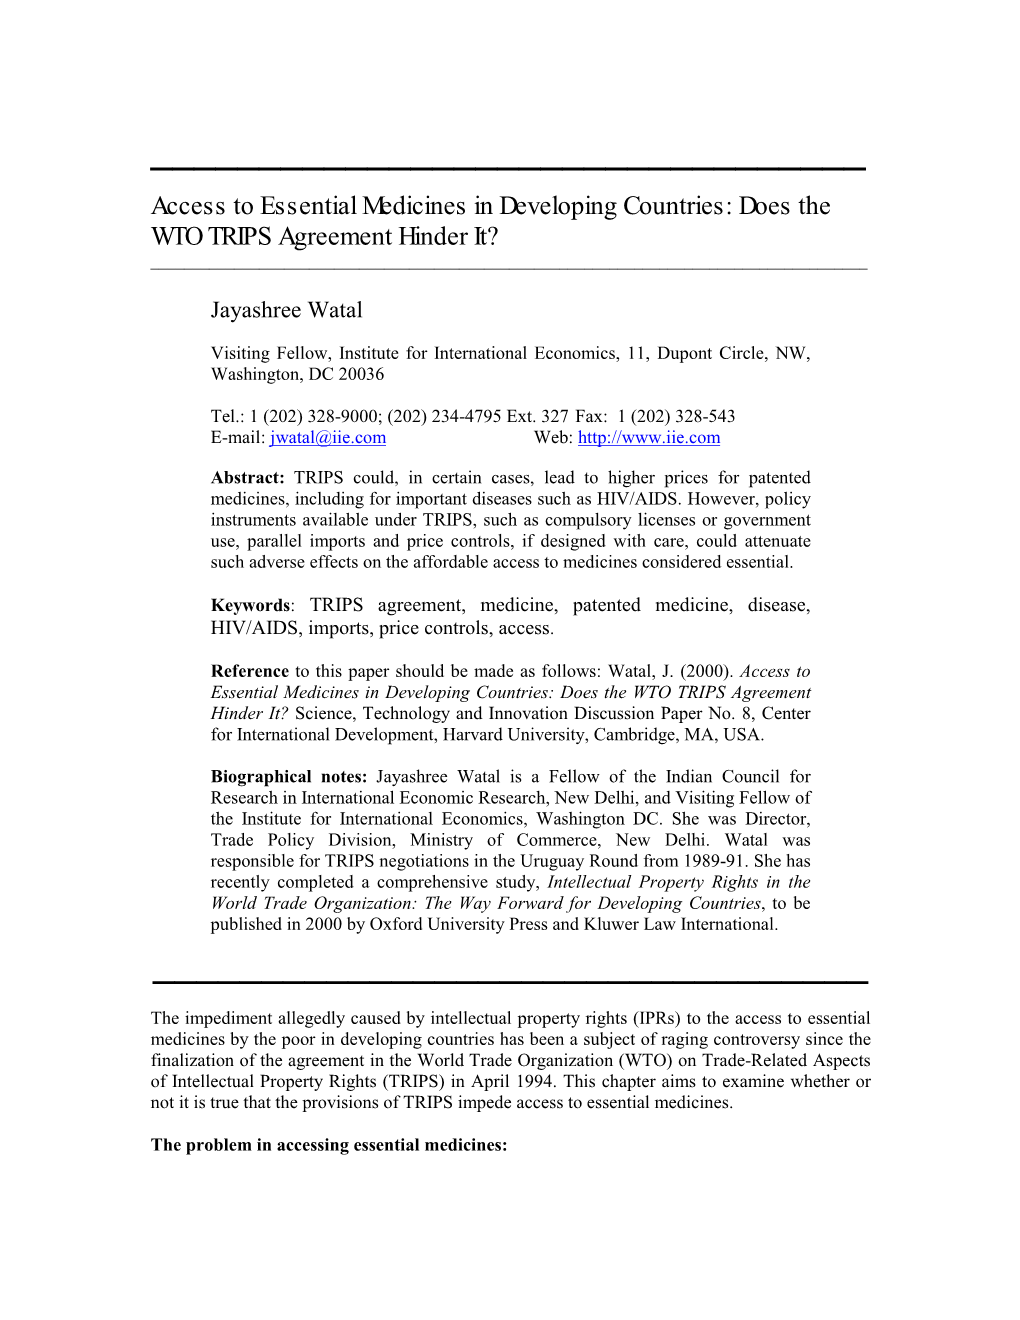 Access to Essential Medicines in Developing Countries: Does the WTO TRIPS Agreement Hinder It? ______